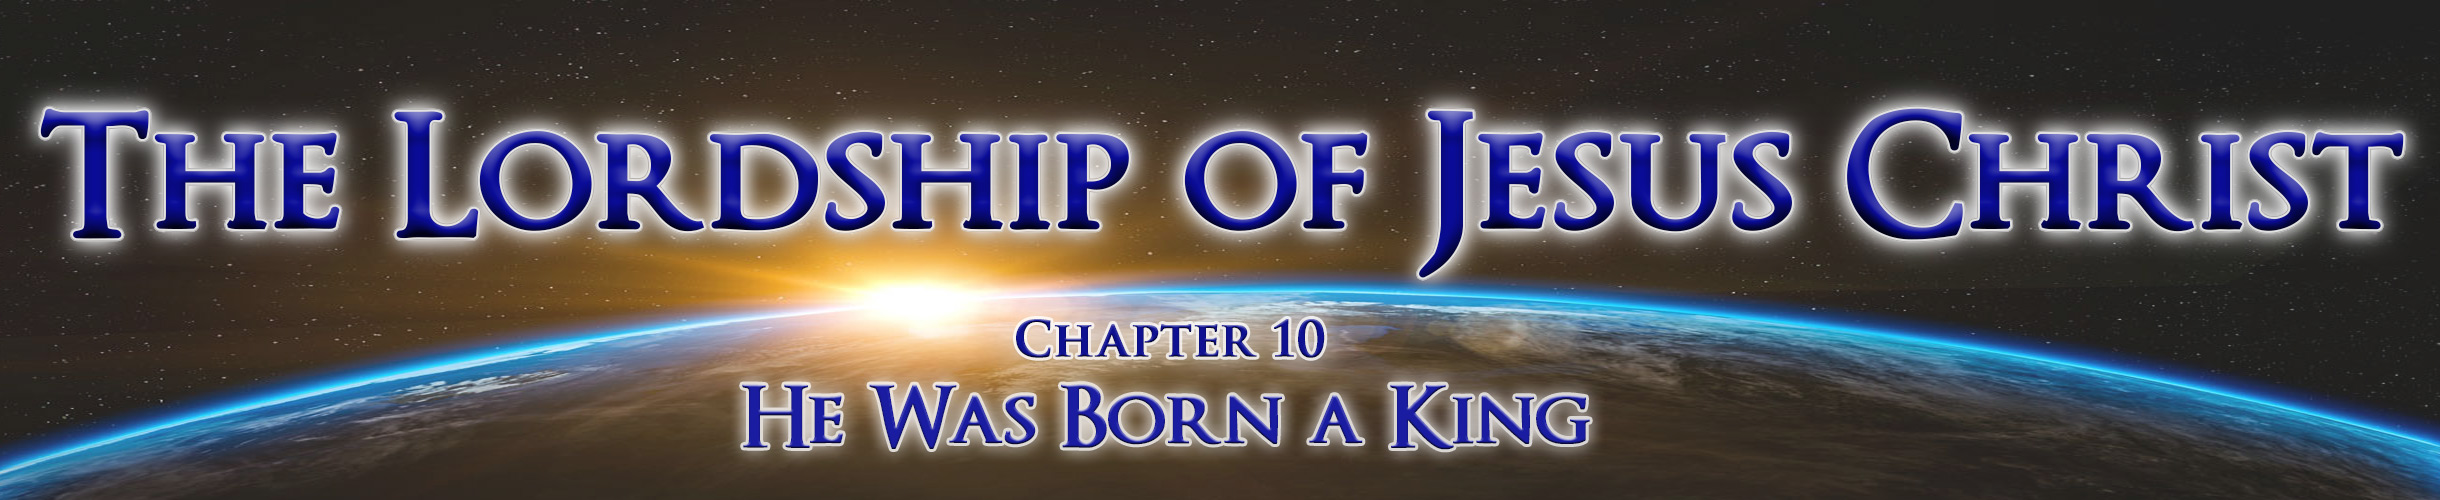 The Lordship of Jesus Christ - banner-Part 10, HE WAS BORN A KING